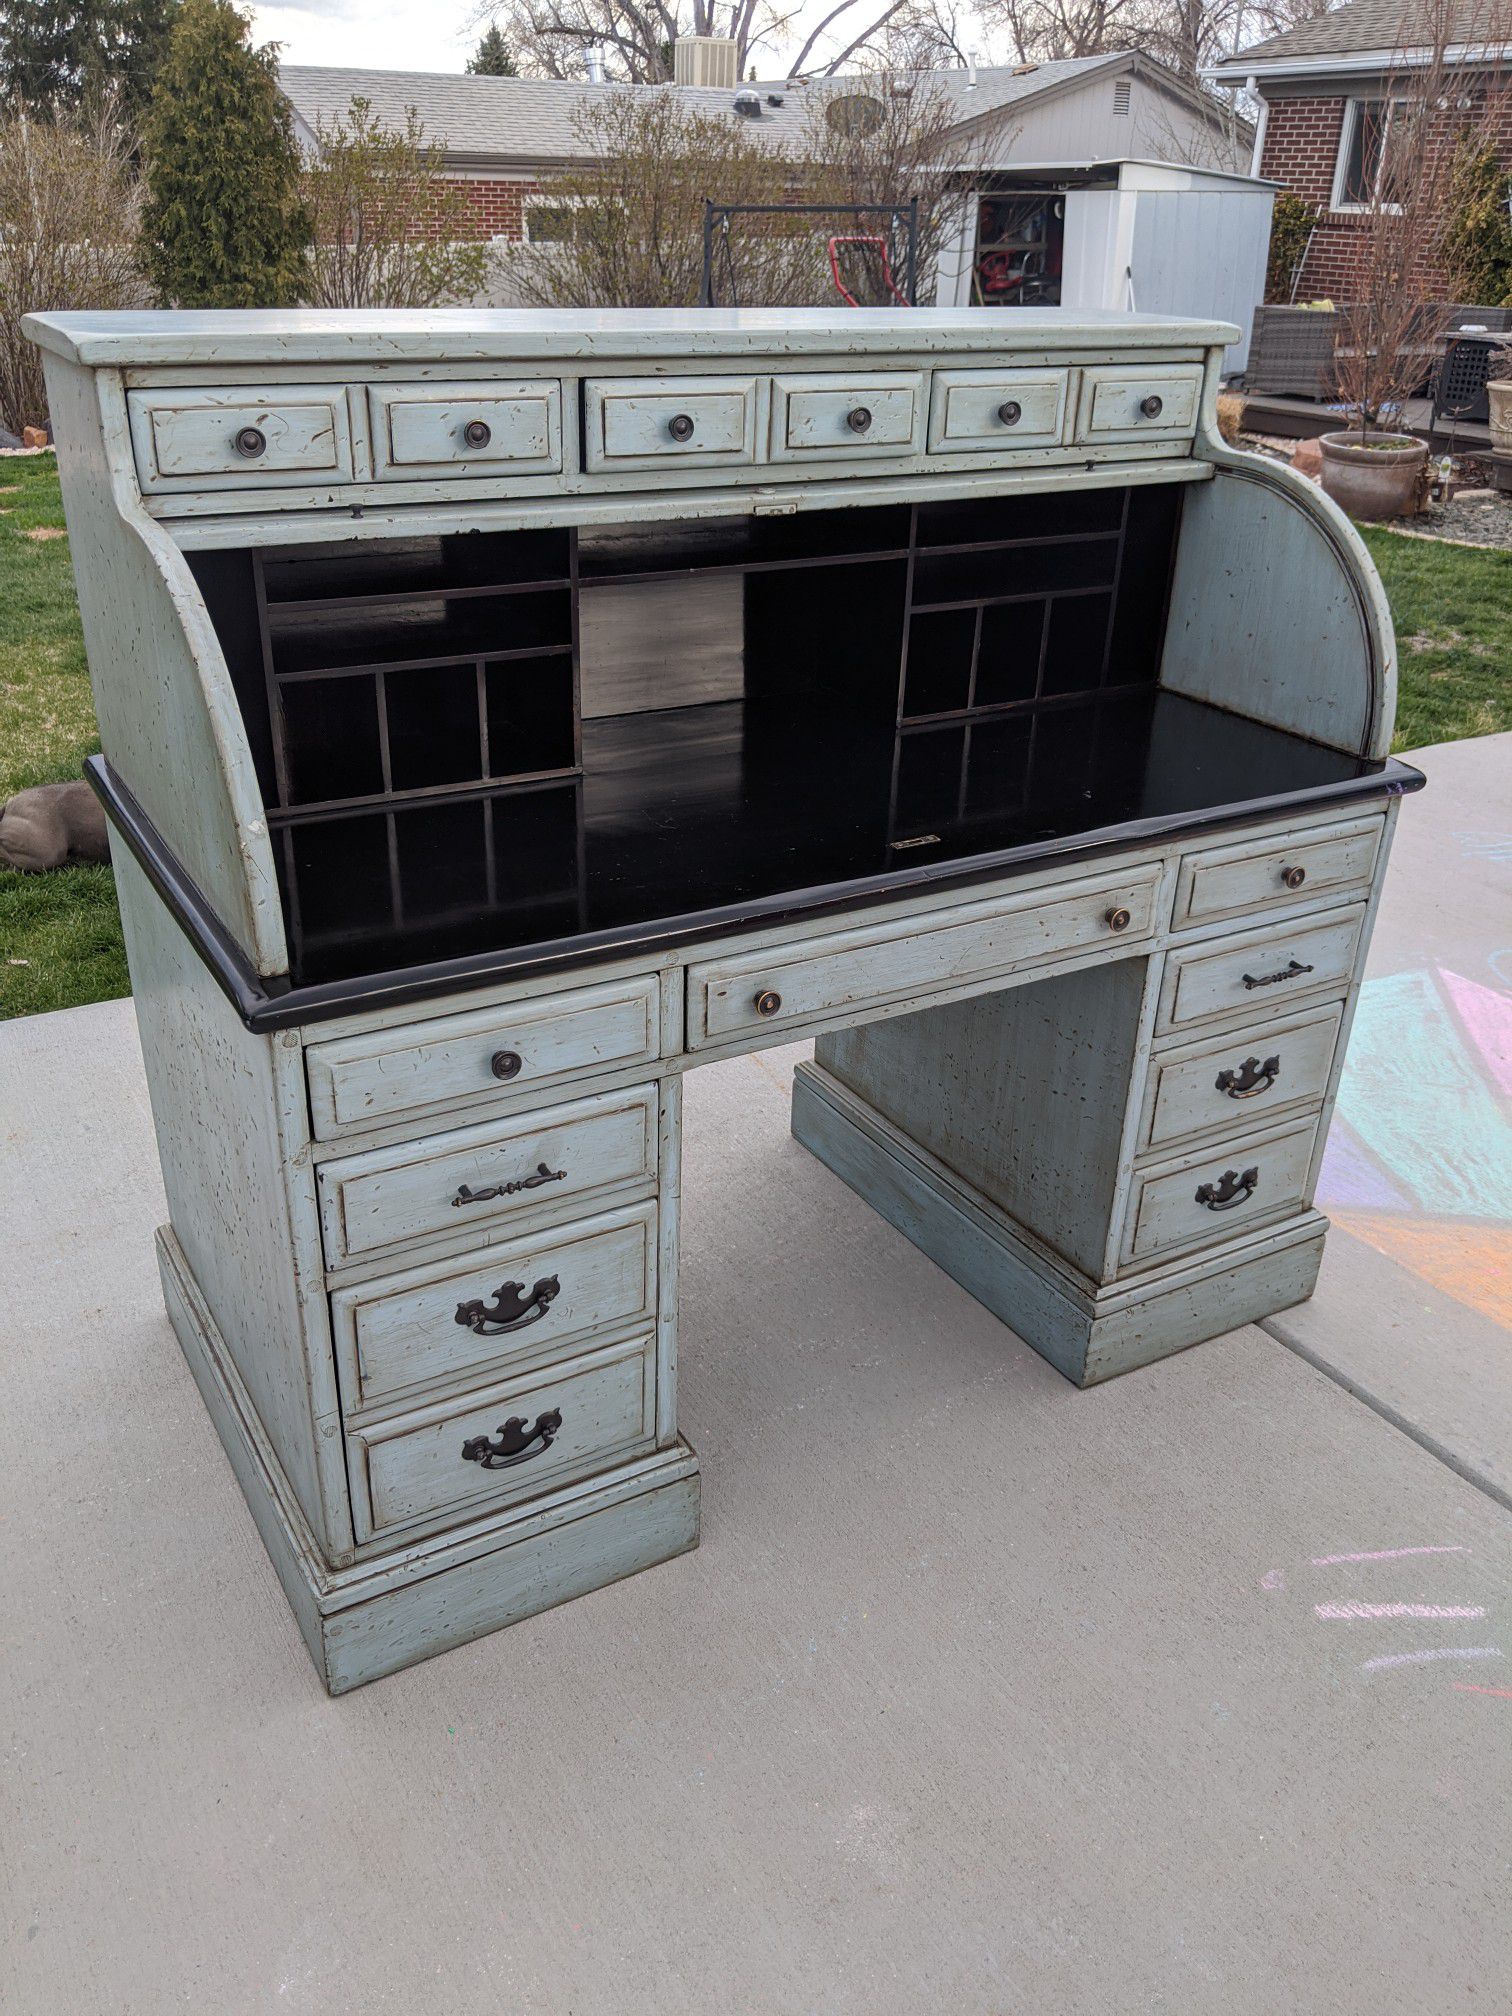 Rustic shabby chic style roll top desk one of a kind!